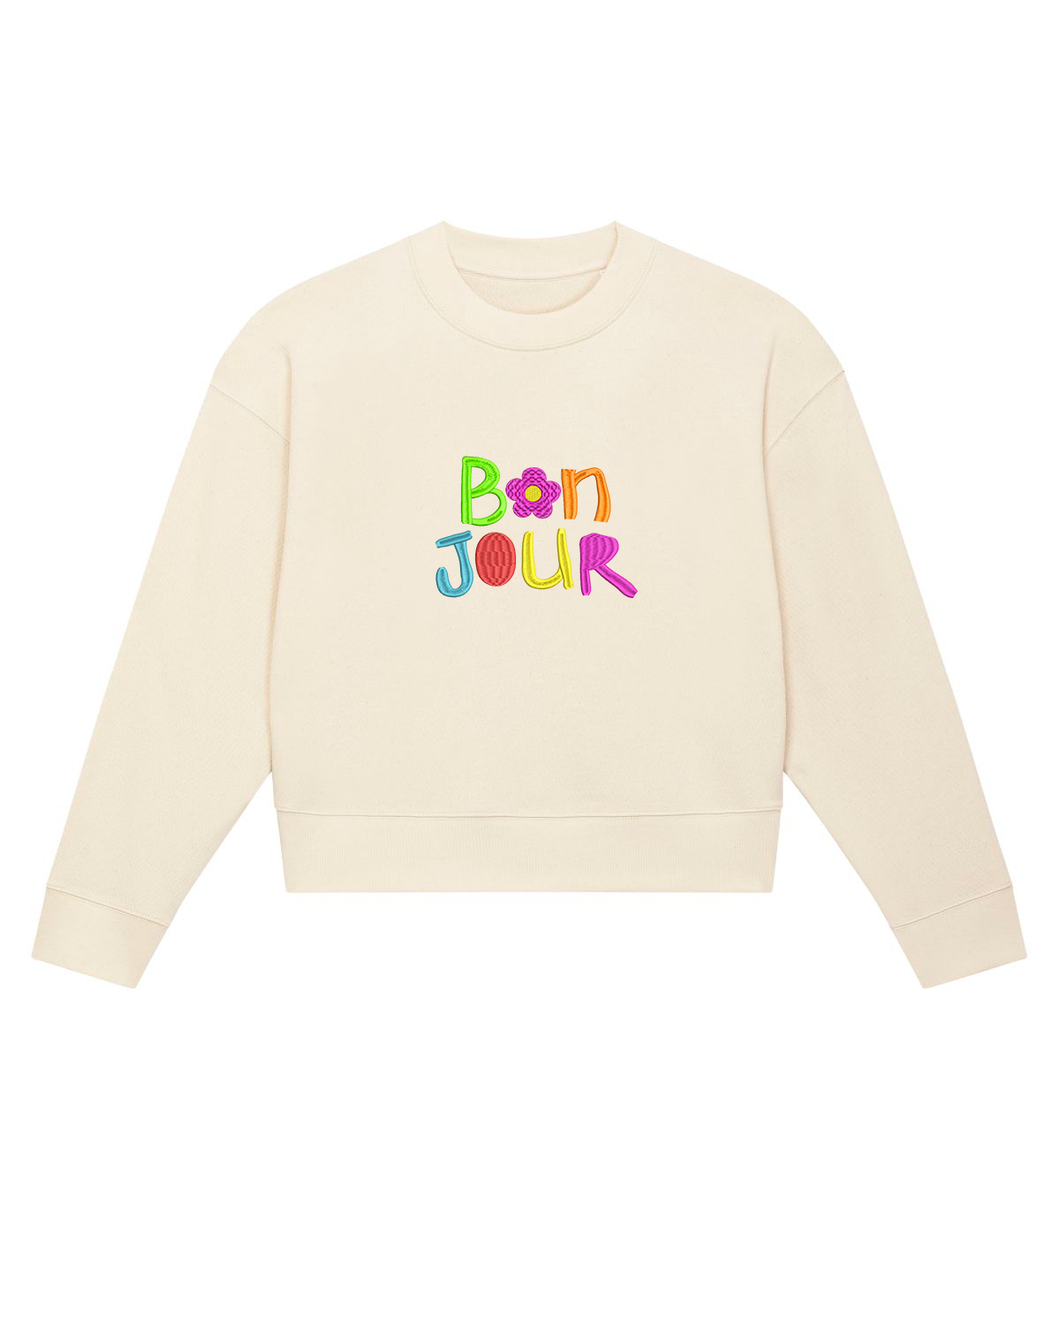 B🌸N JOUR Embroidered WOMEN'S CROPPED CREW NECK SWEATSHIRT /WAVE TERRY/